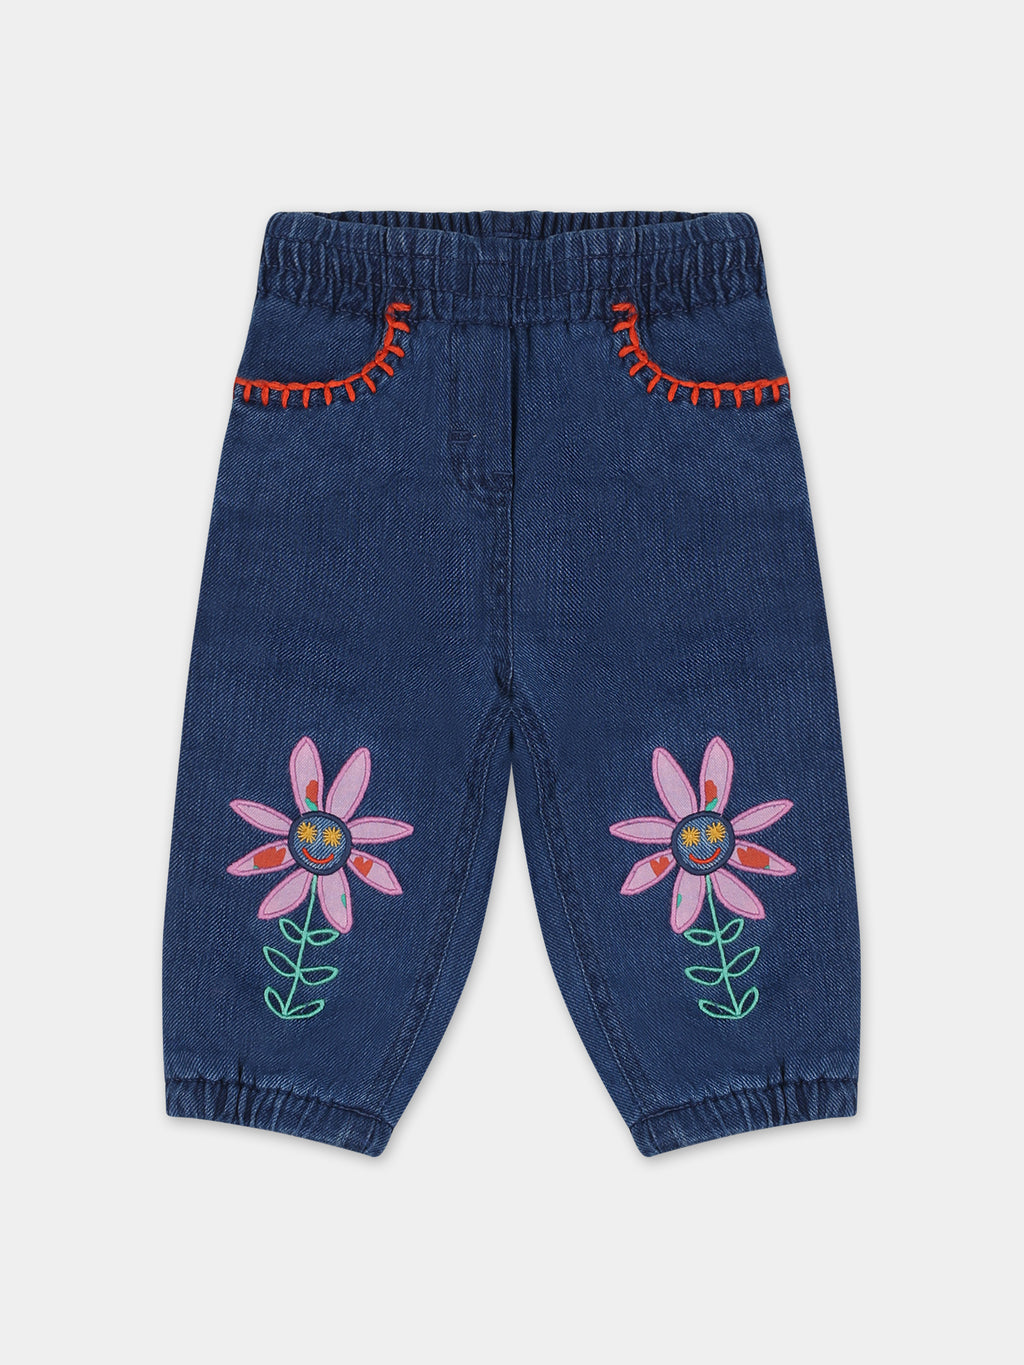 Blue jeans for baby girl with flowers